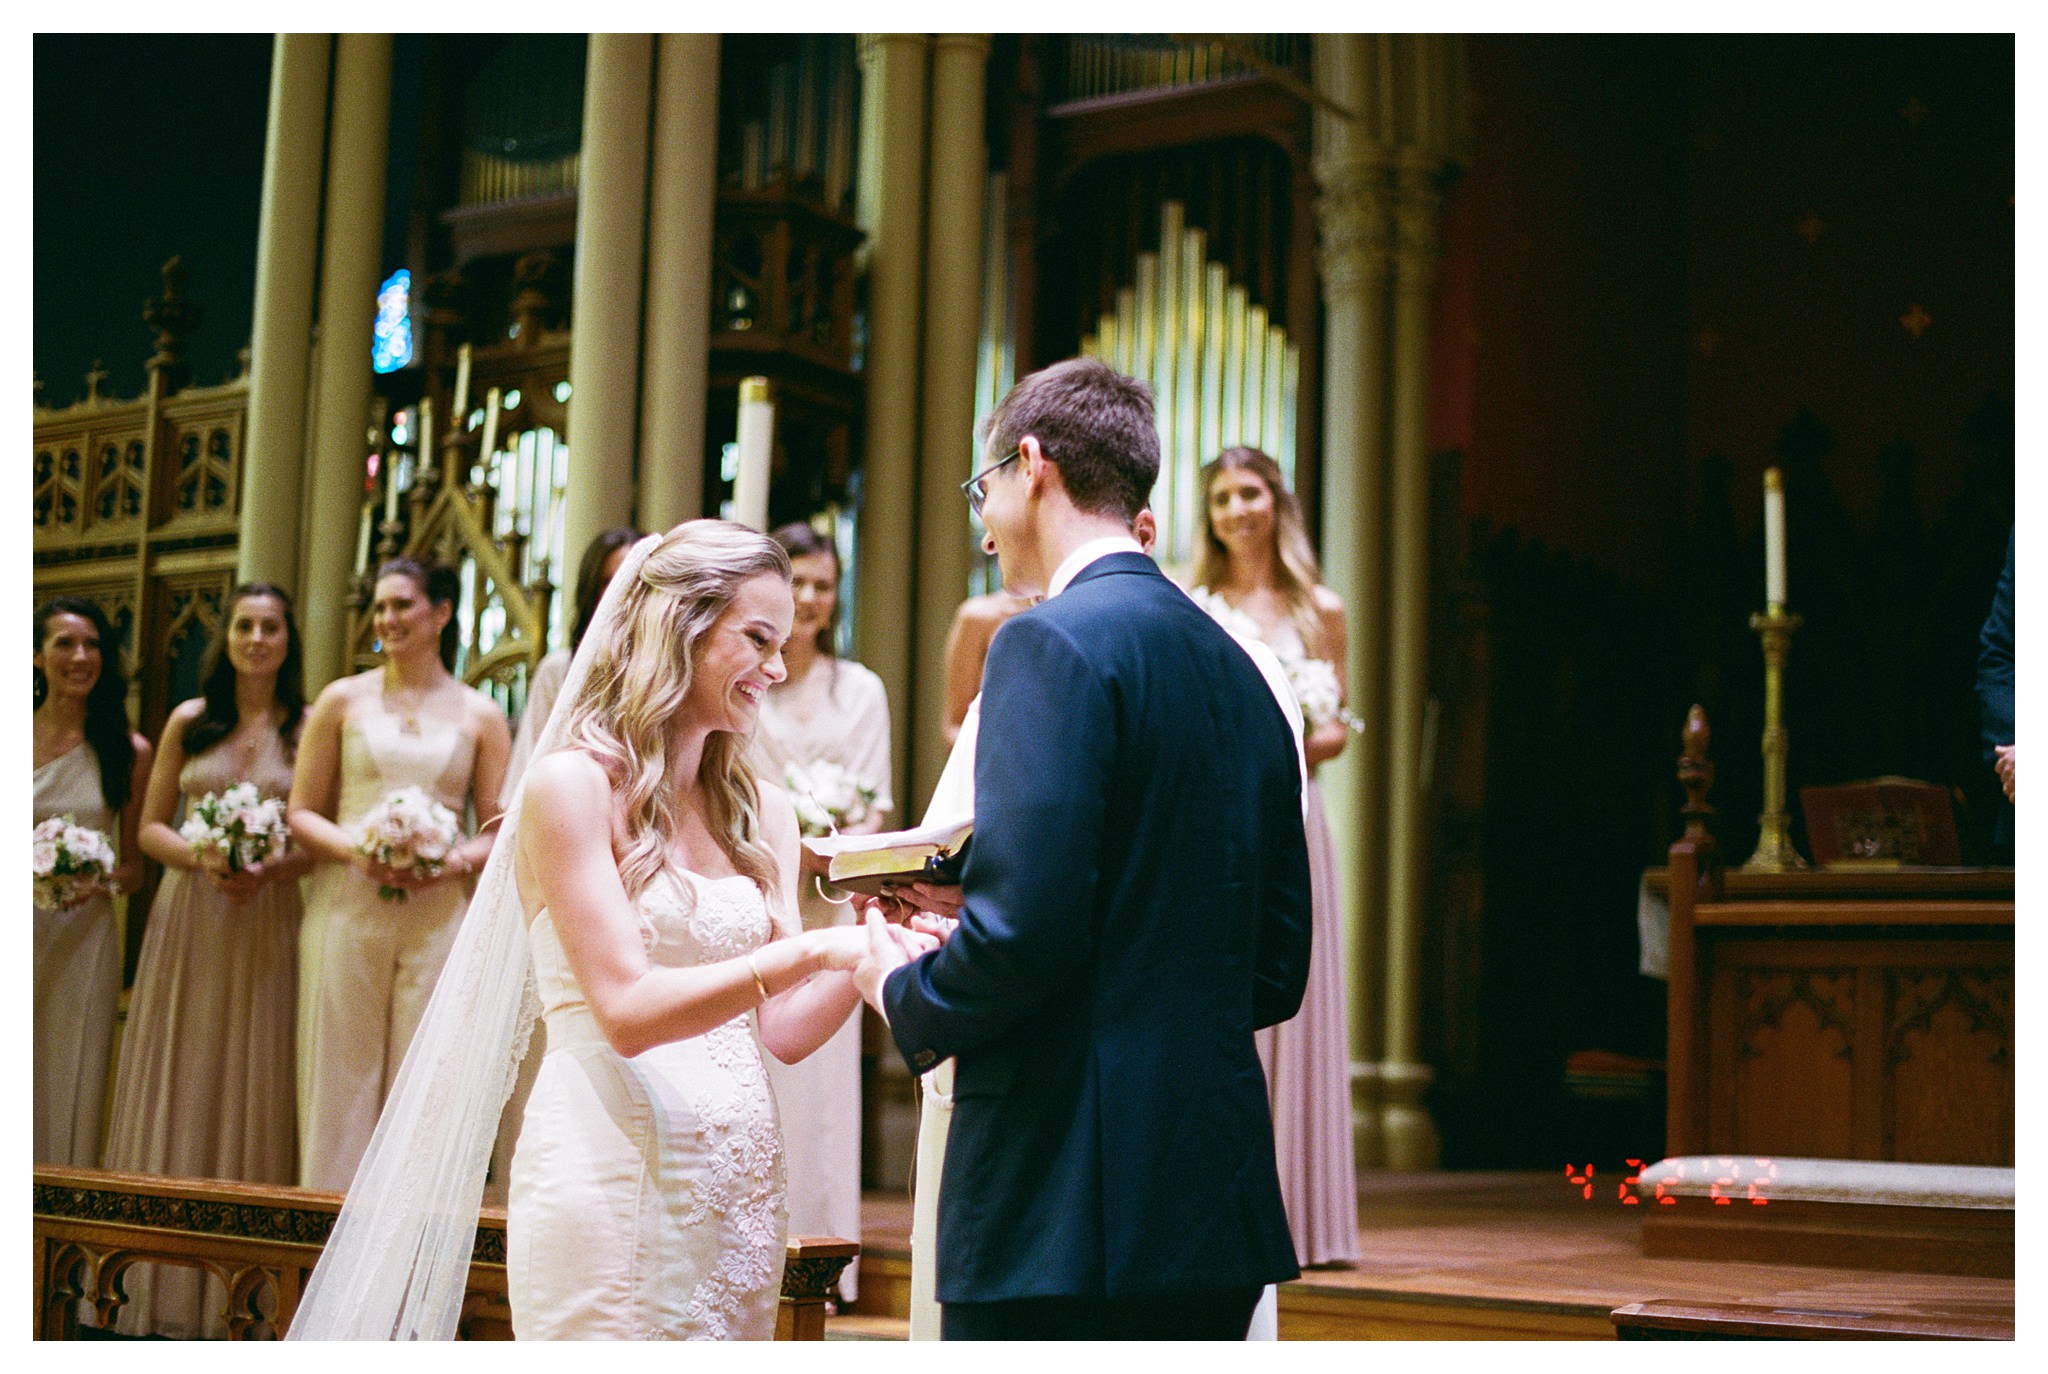 A man puts a ring on a woman’s finger during a church wedding.